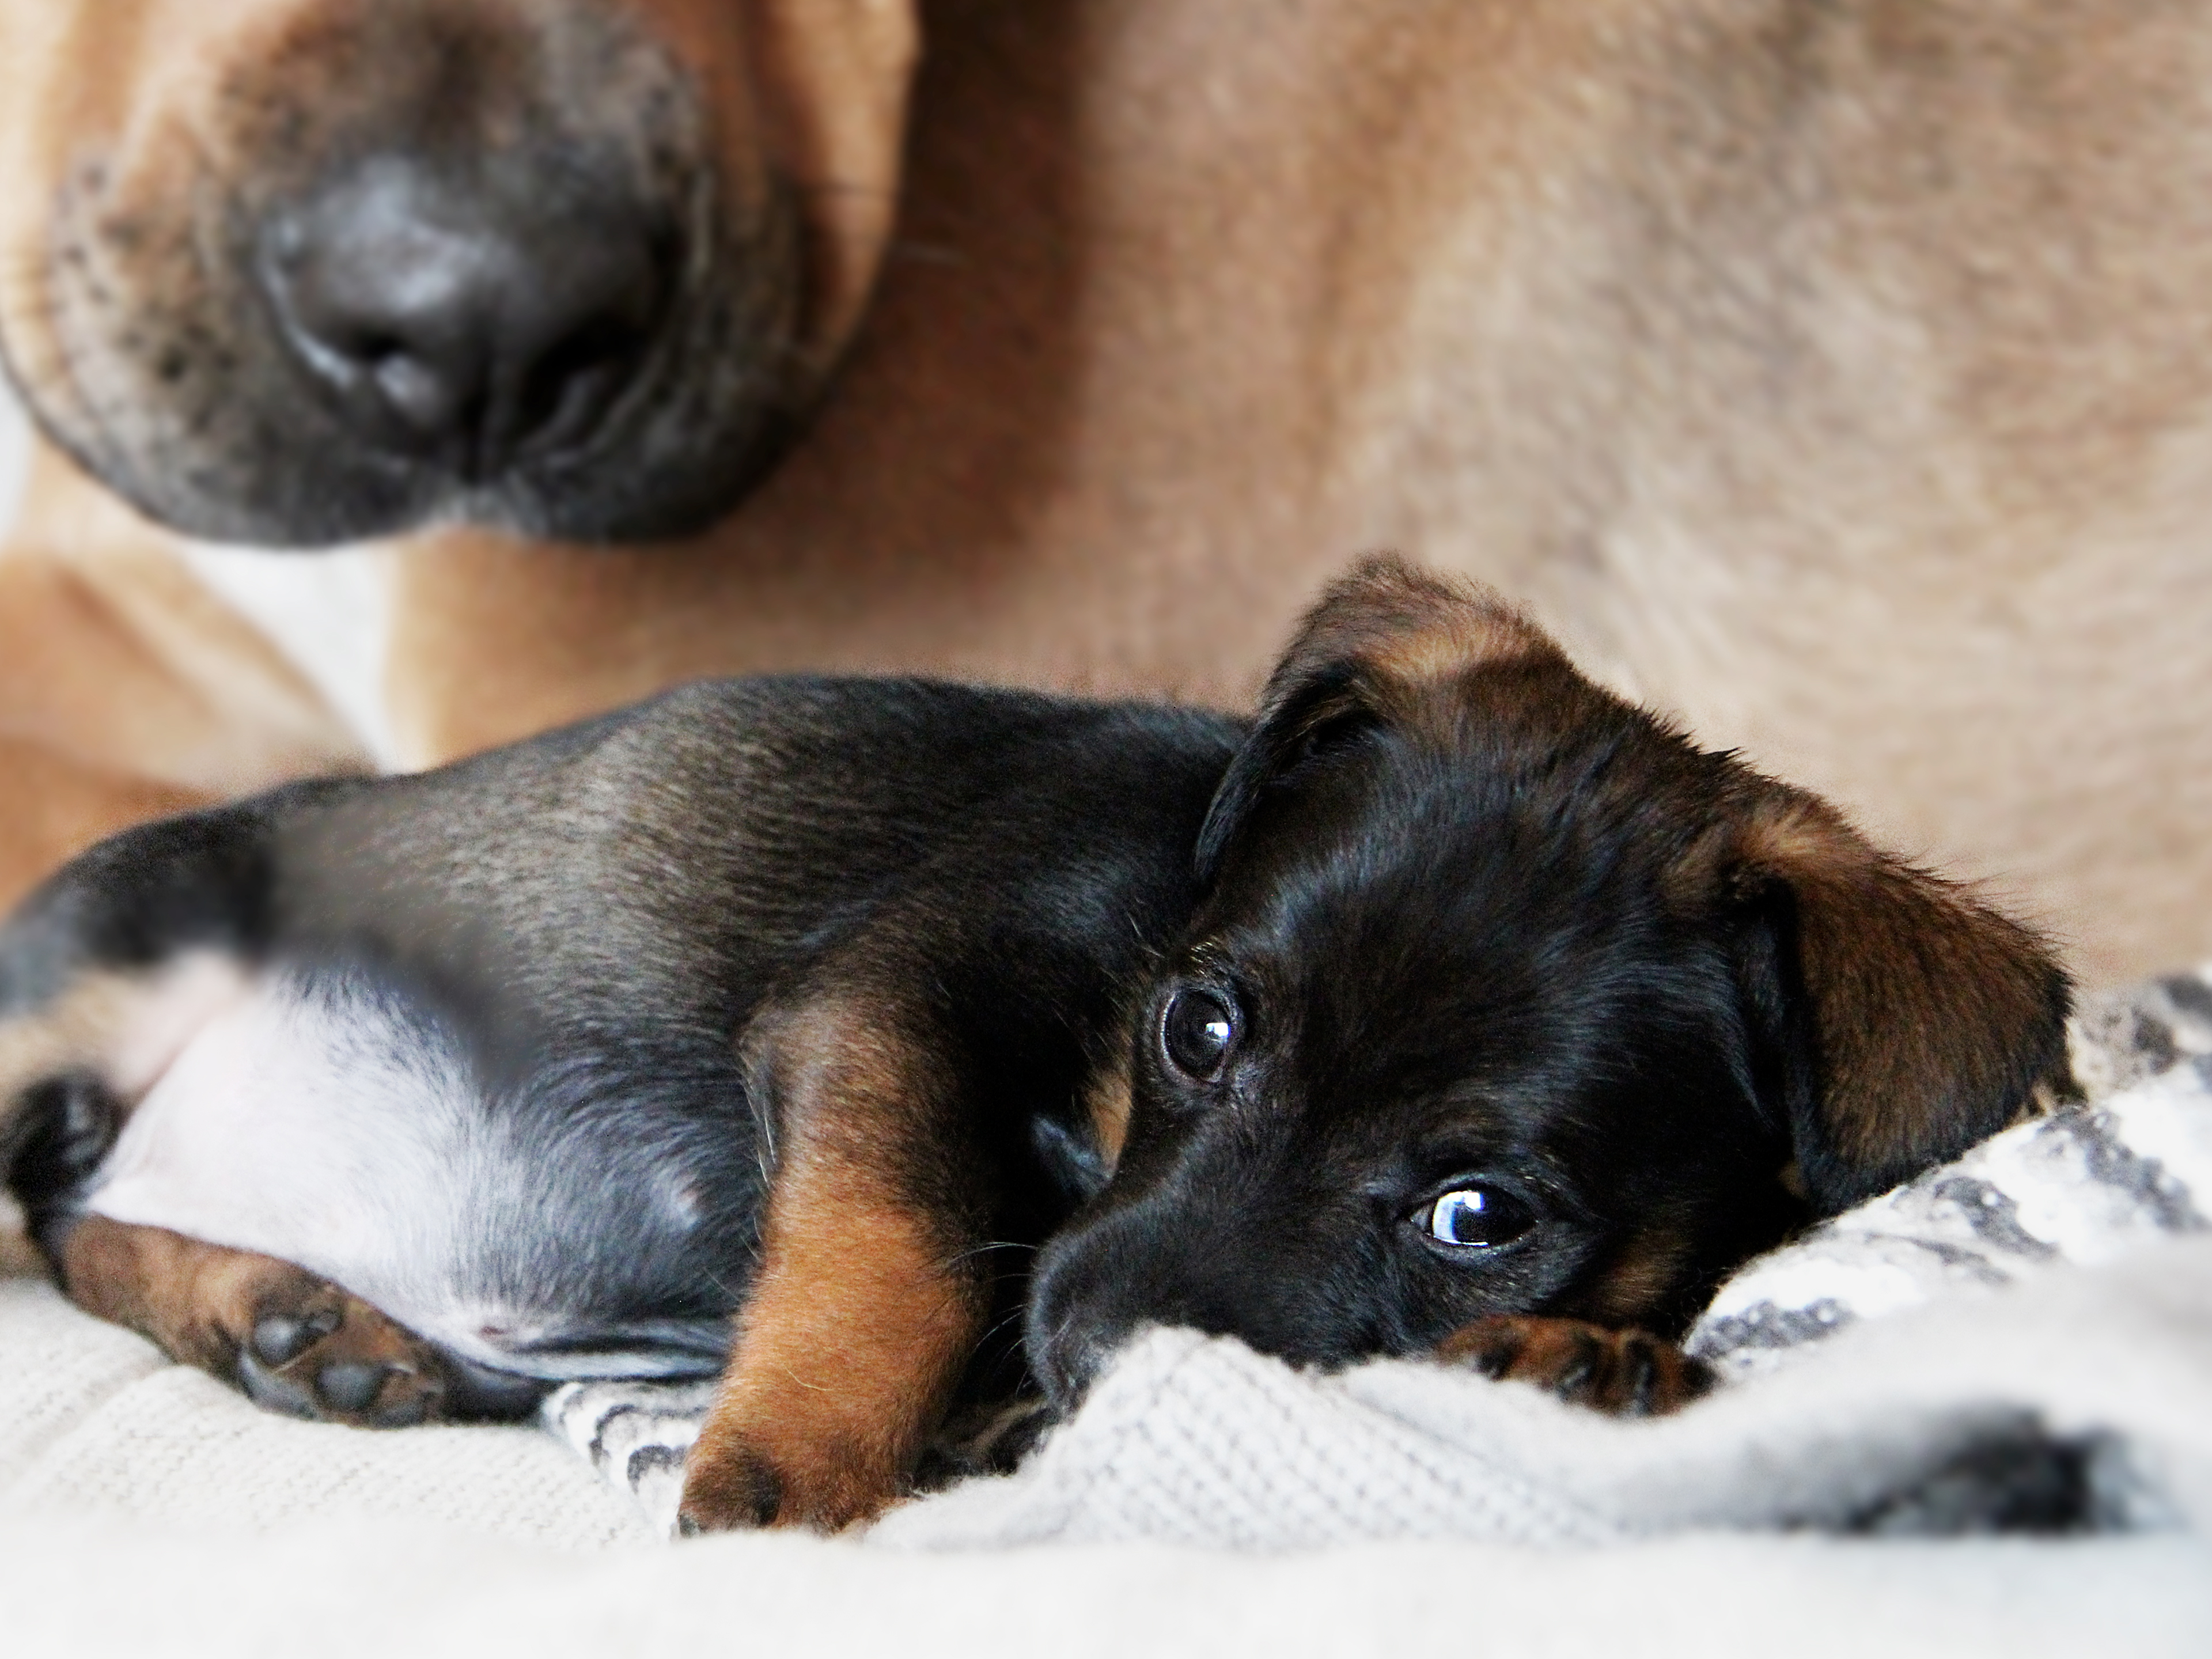 Puppy lying on a blanket next to mother